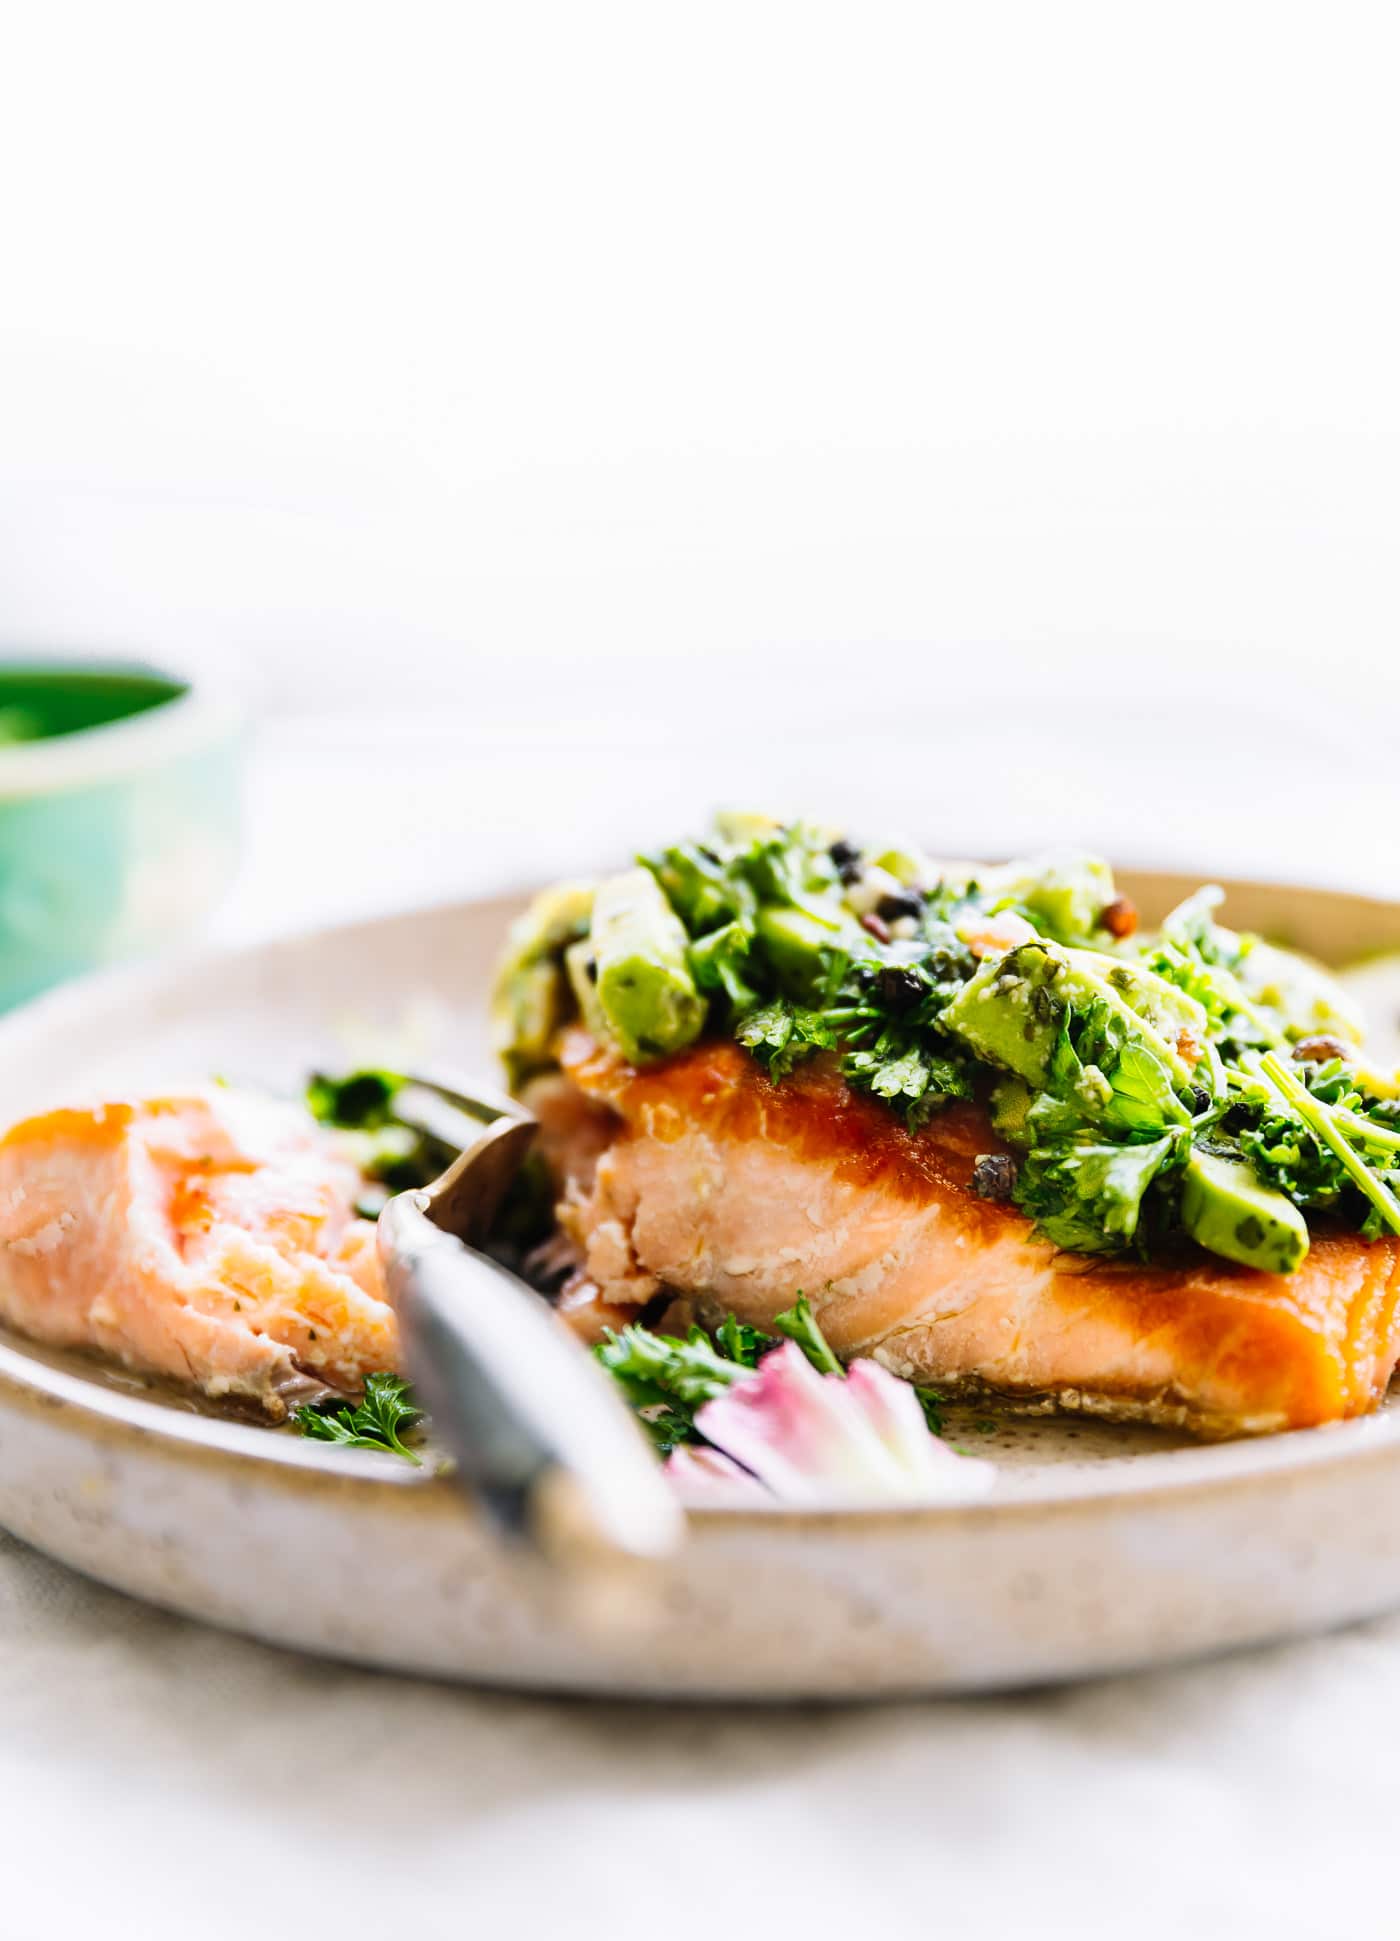 A fork cutting into a pan seared salmon fillet topped with avocado gremolata.